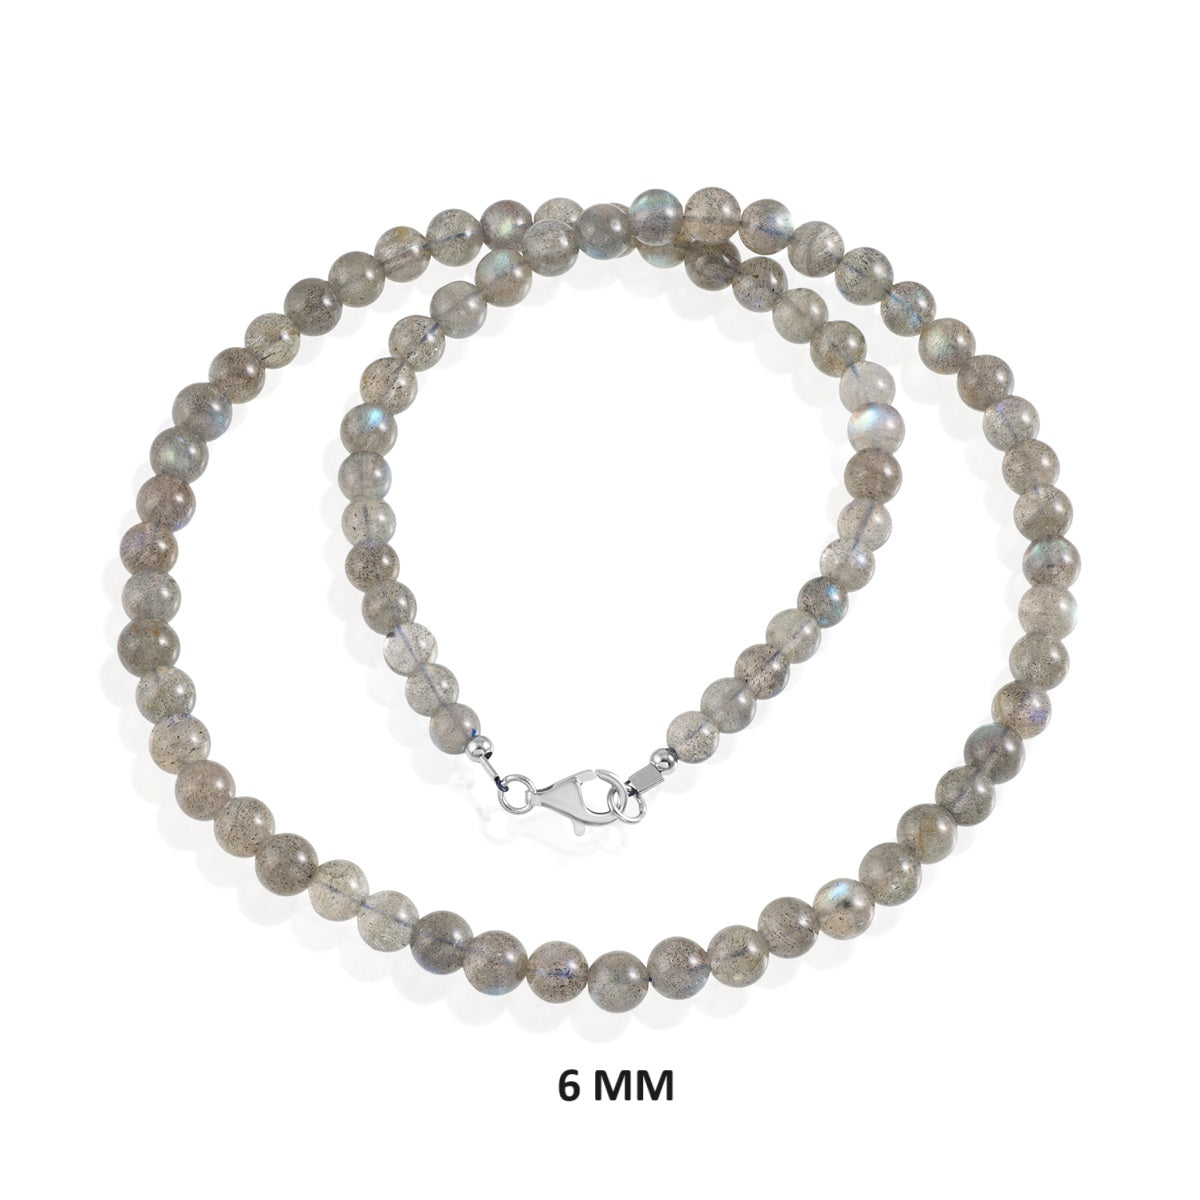 Labradorite Beads Silver Necklace: Transformation and Sophistication